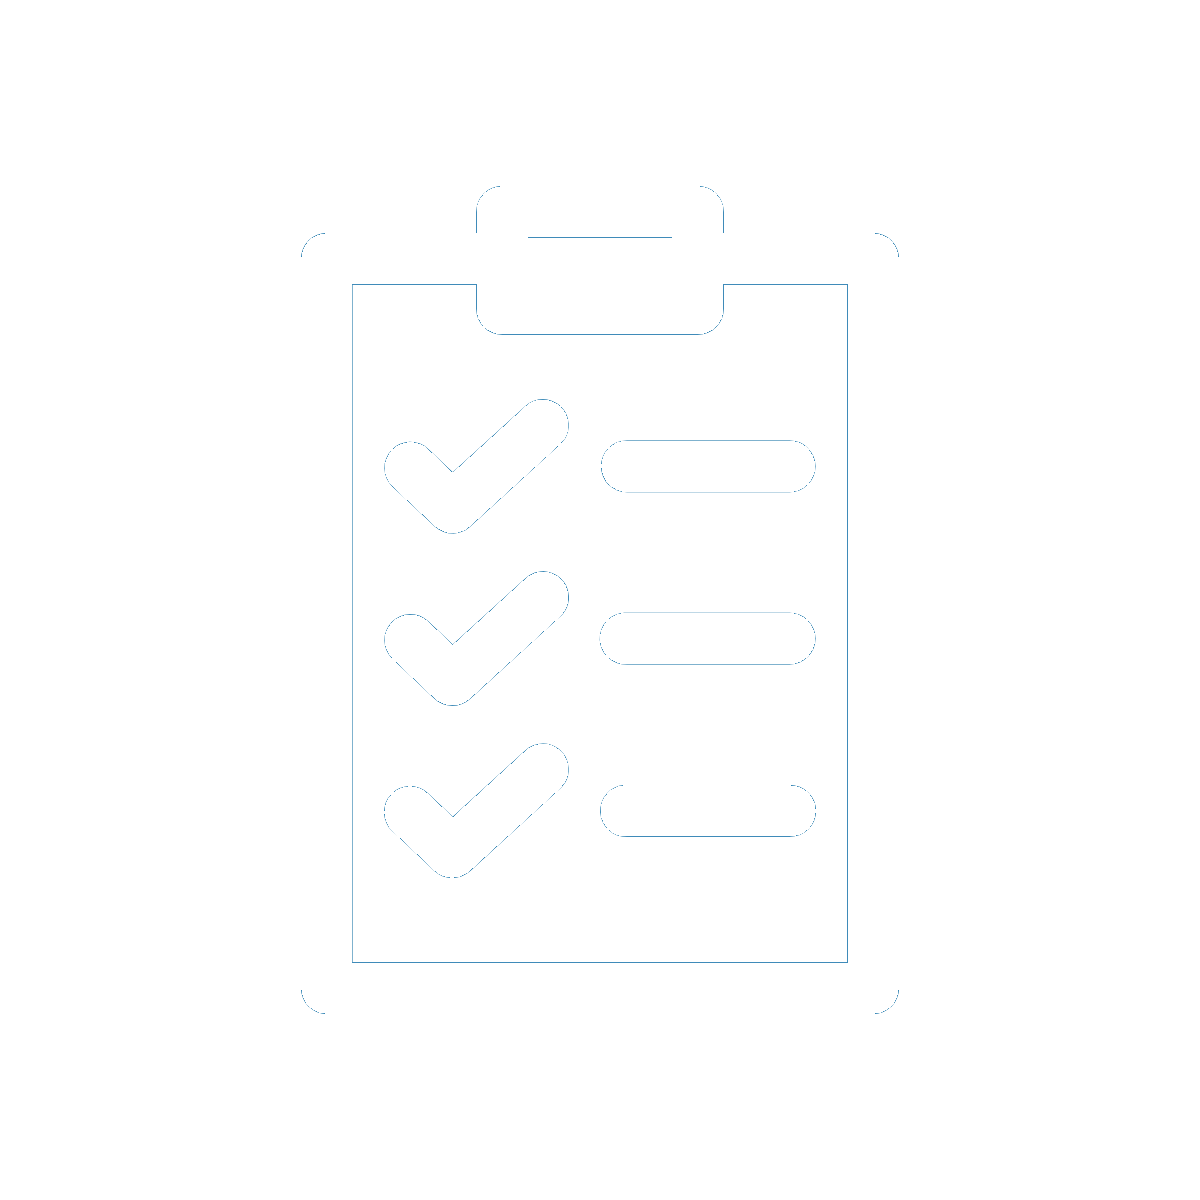 Icon of piece of paper indicating financial content.